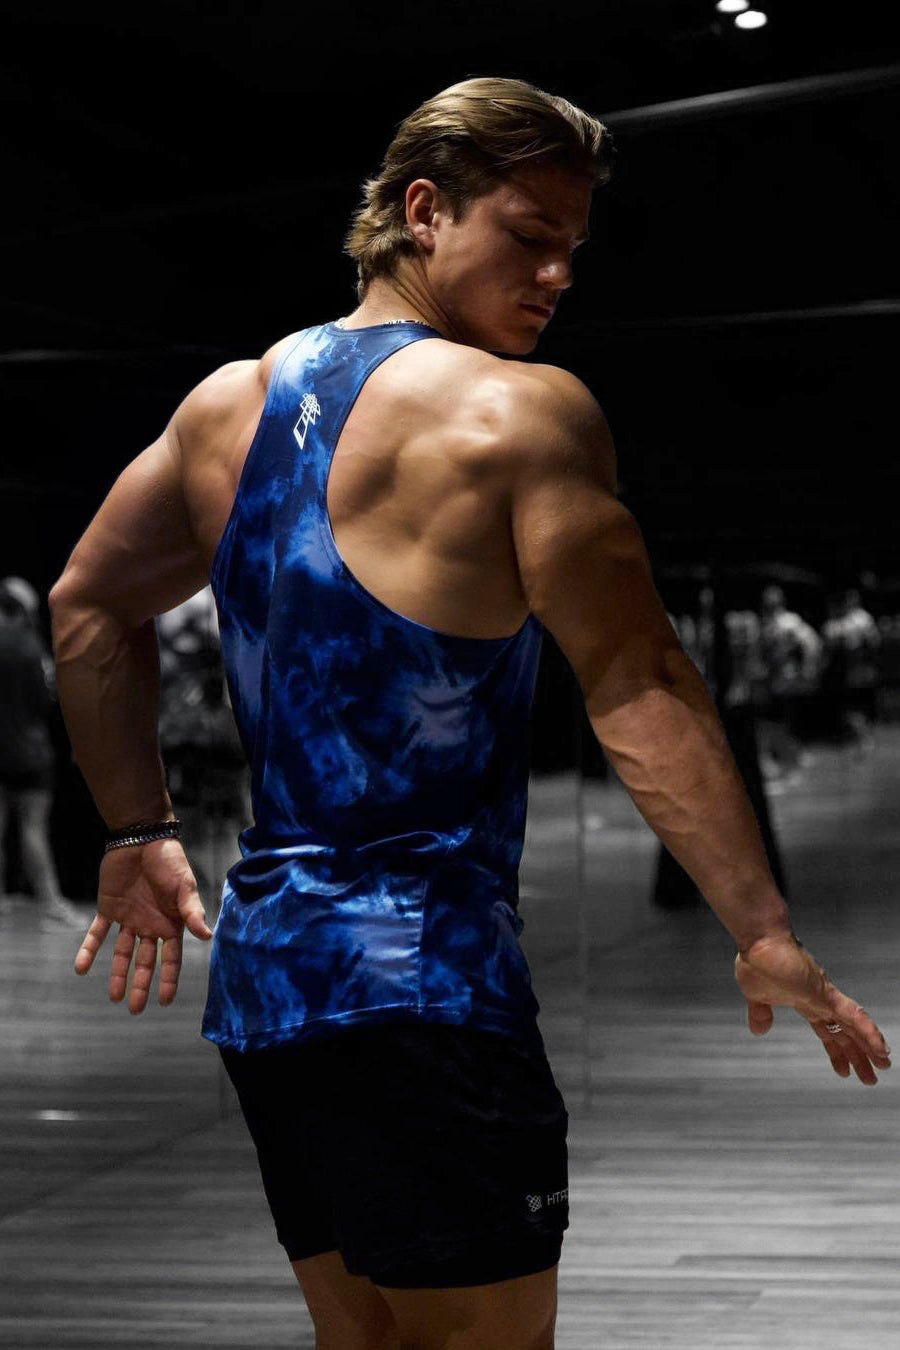 Old School Workout Stringer 2.0 - Abstract Blue